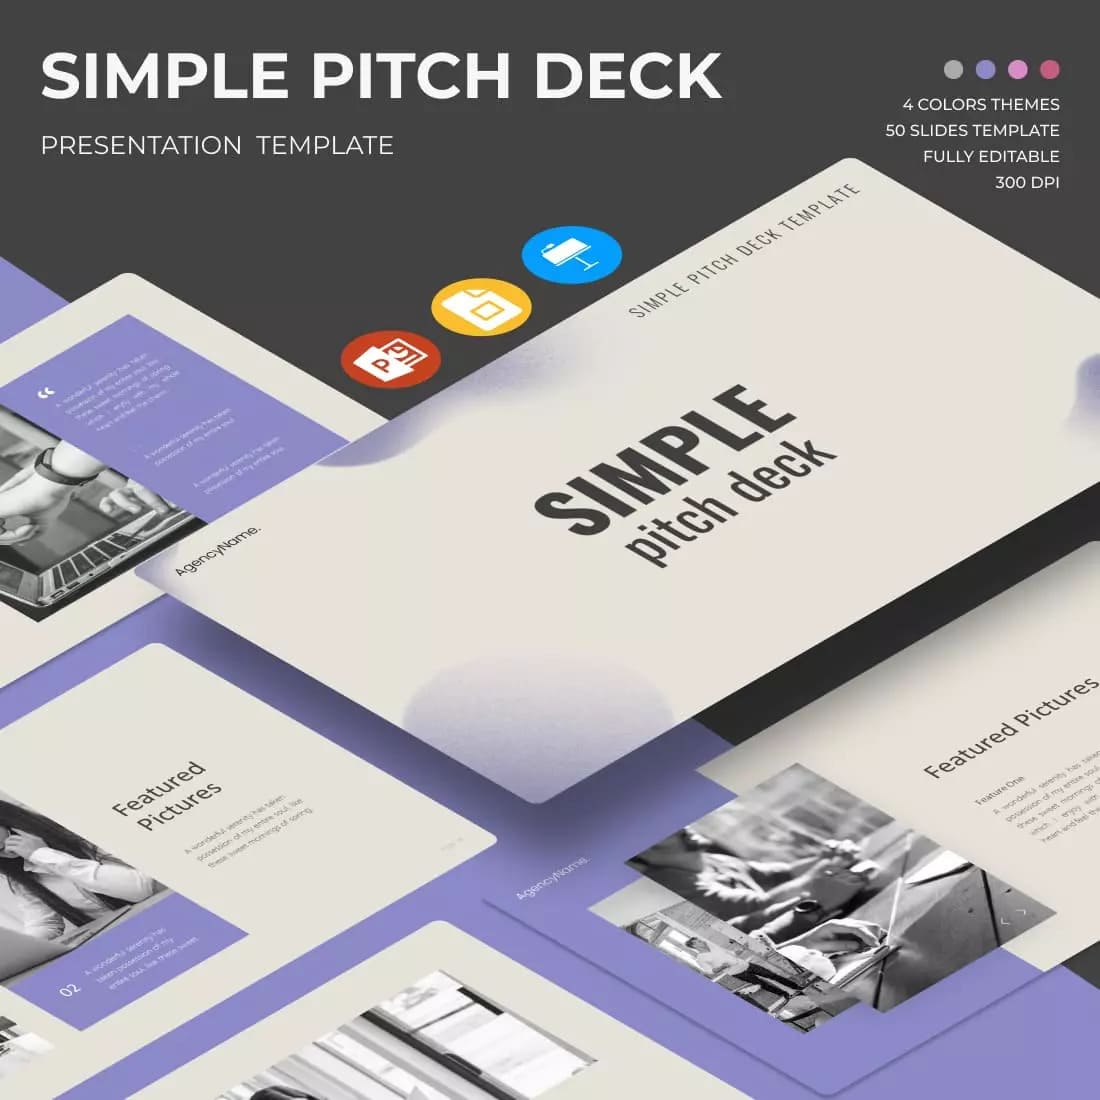 Simple Pitch Deck Presentation Template Preview image.